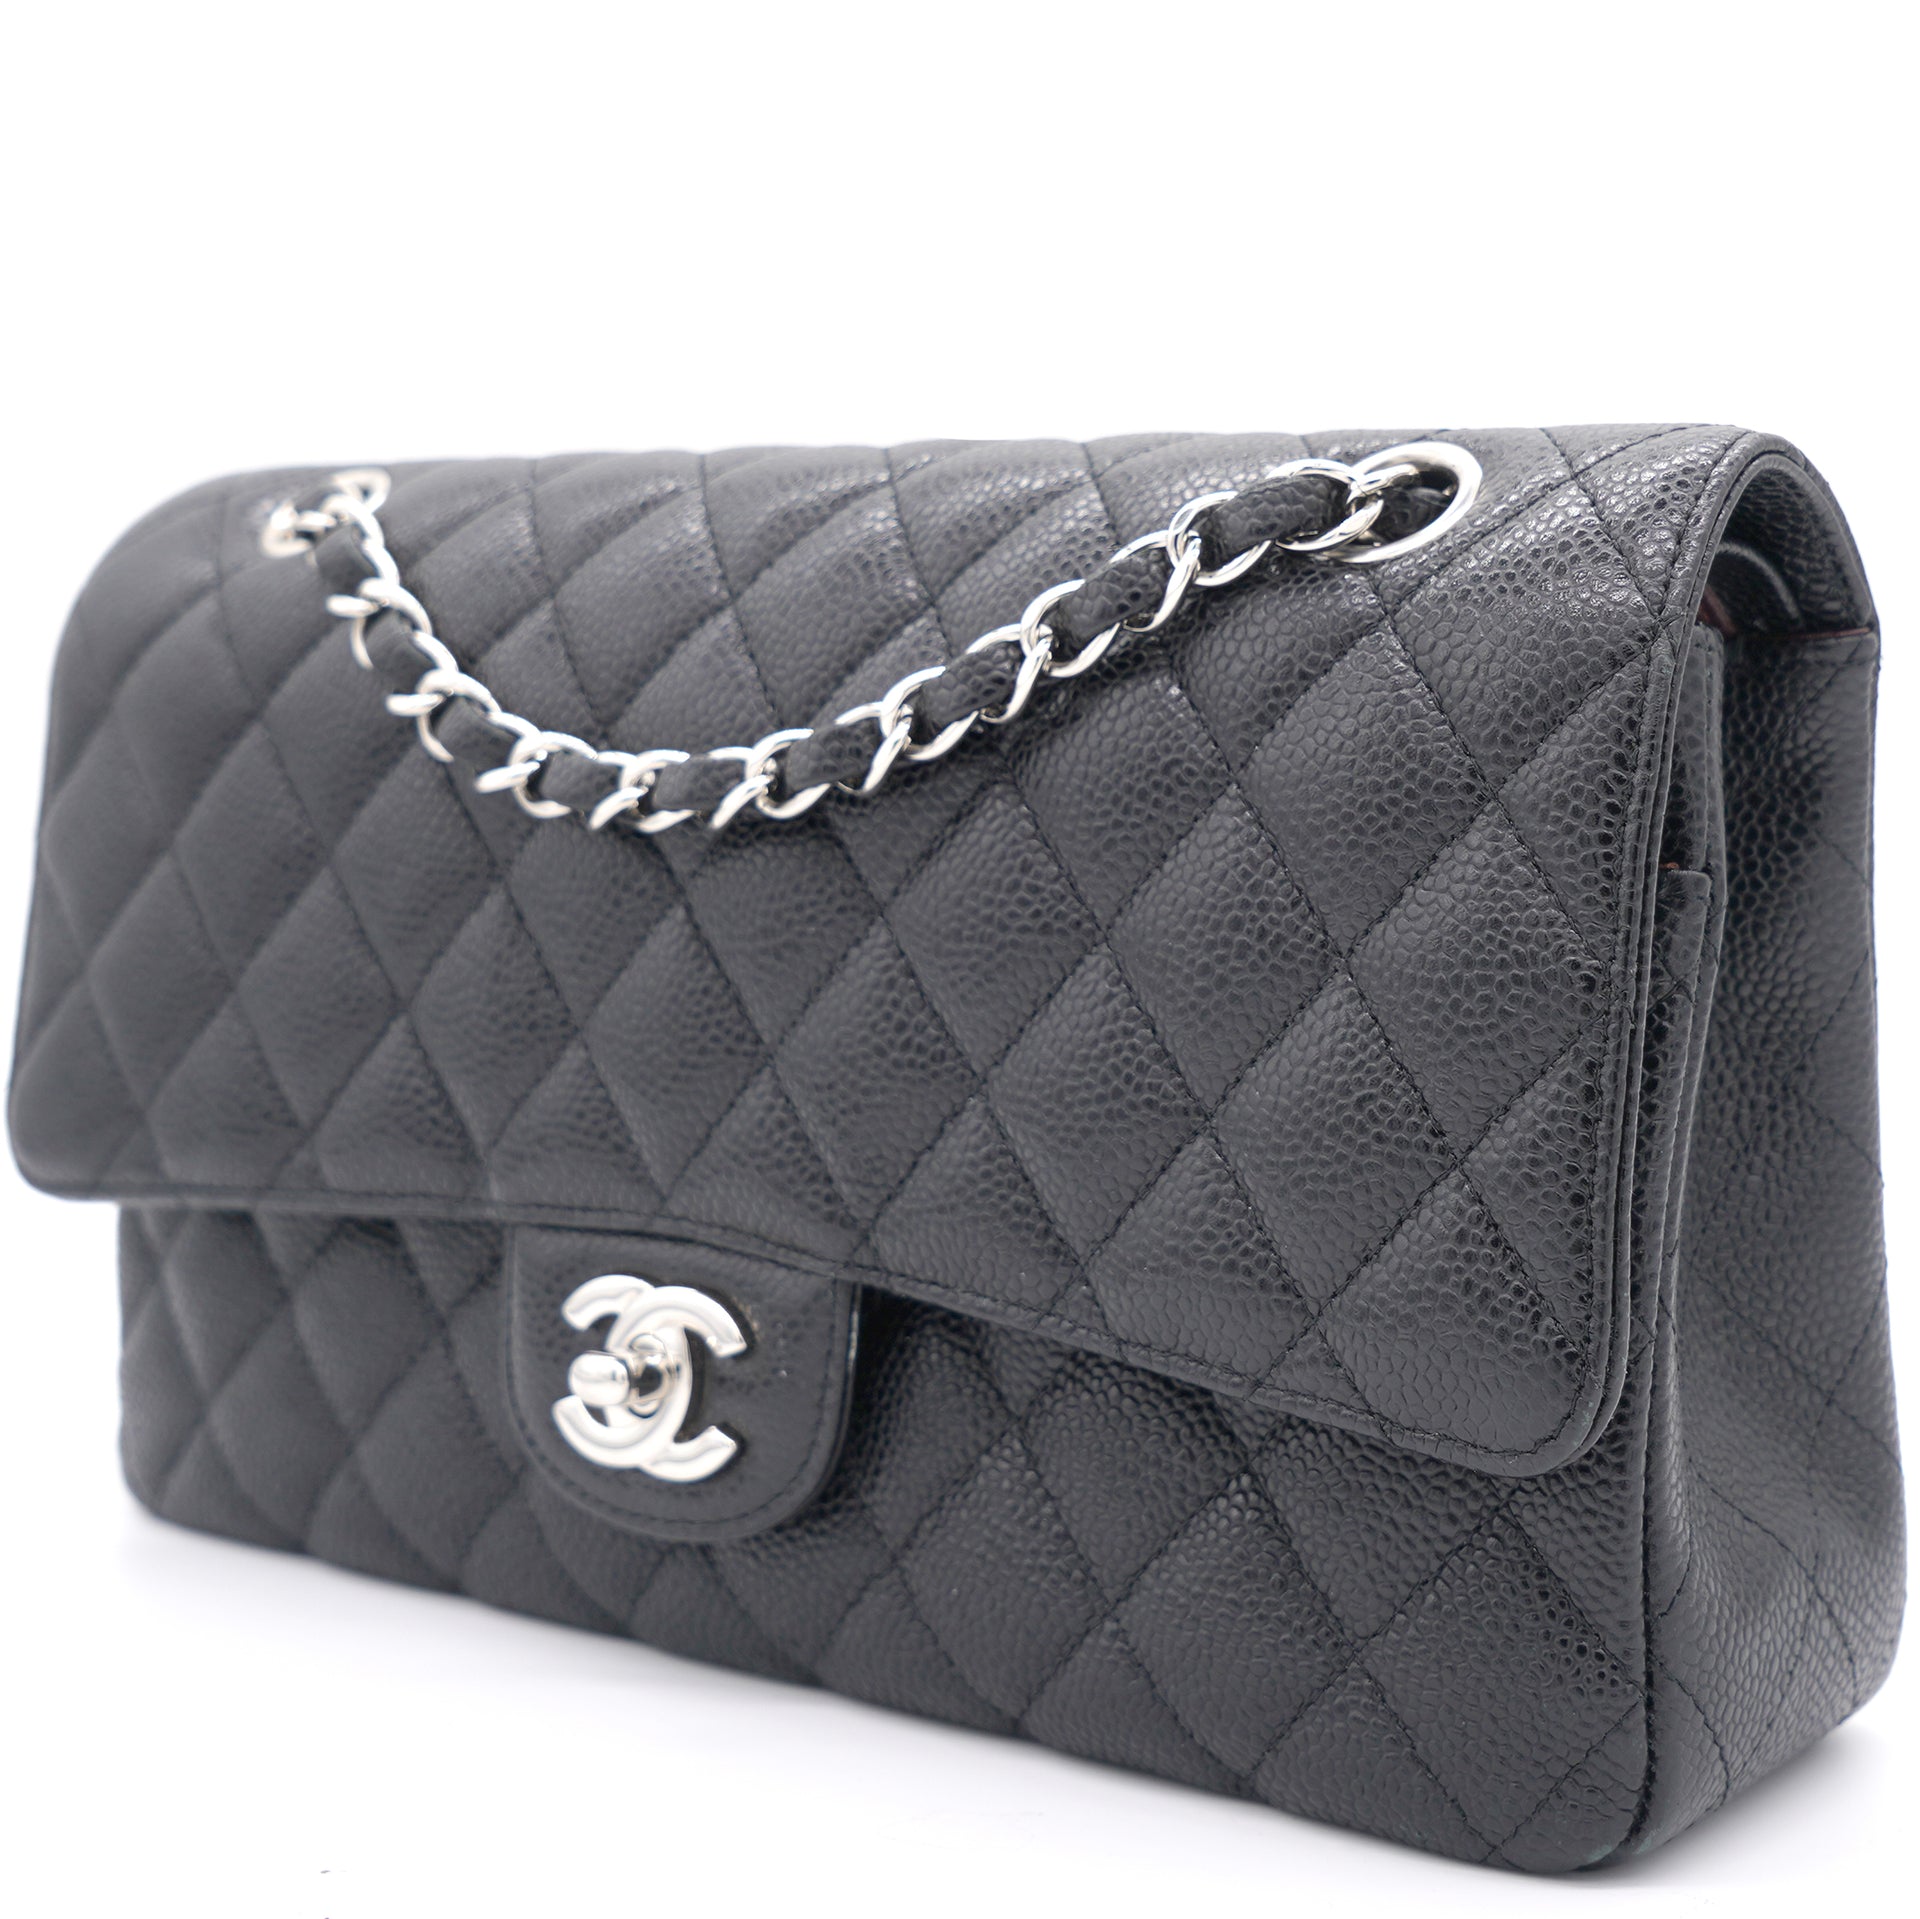 Caviar Quilted Medium Double Flap Black SHW